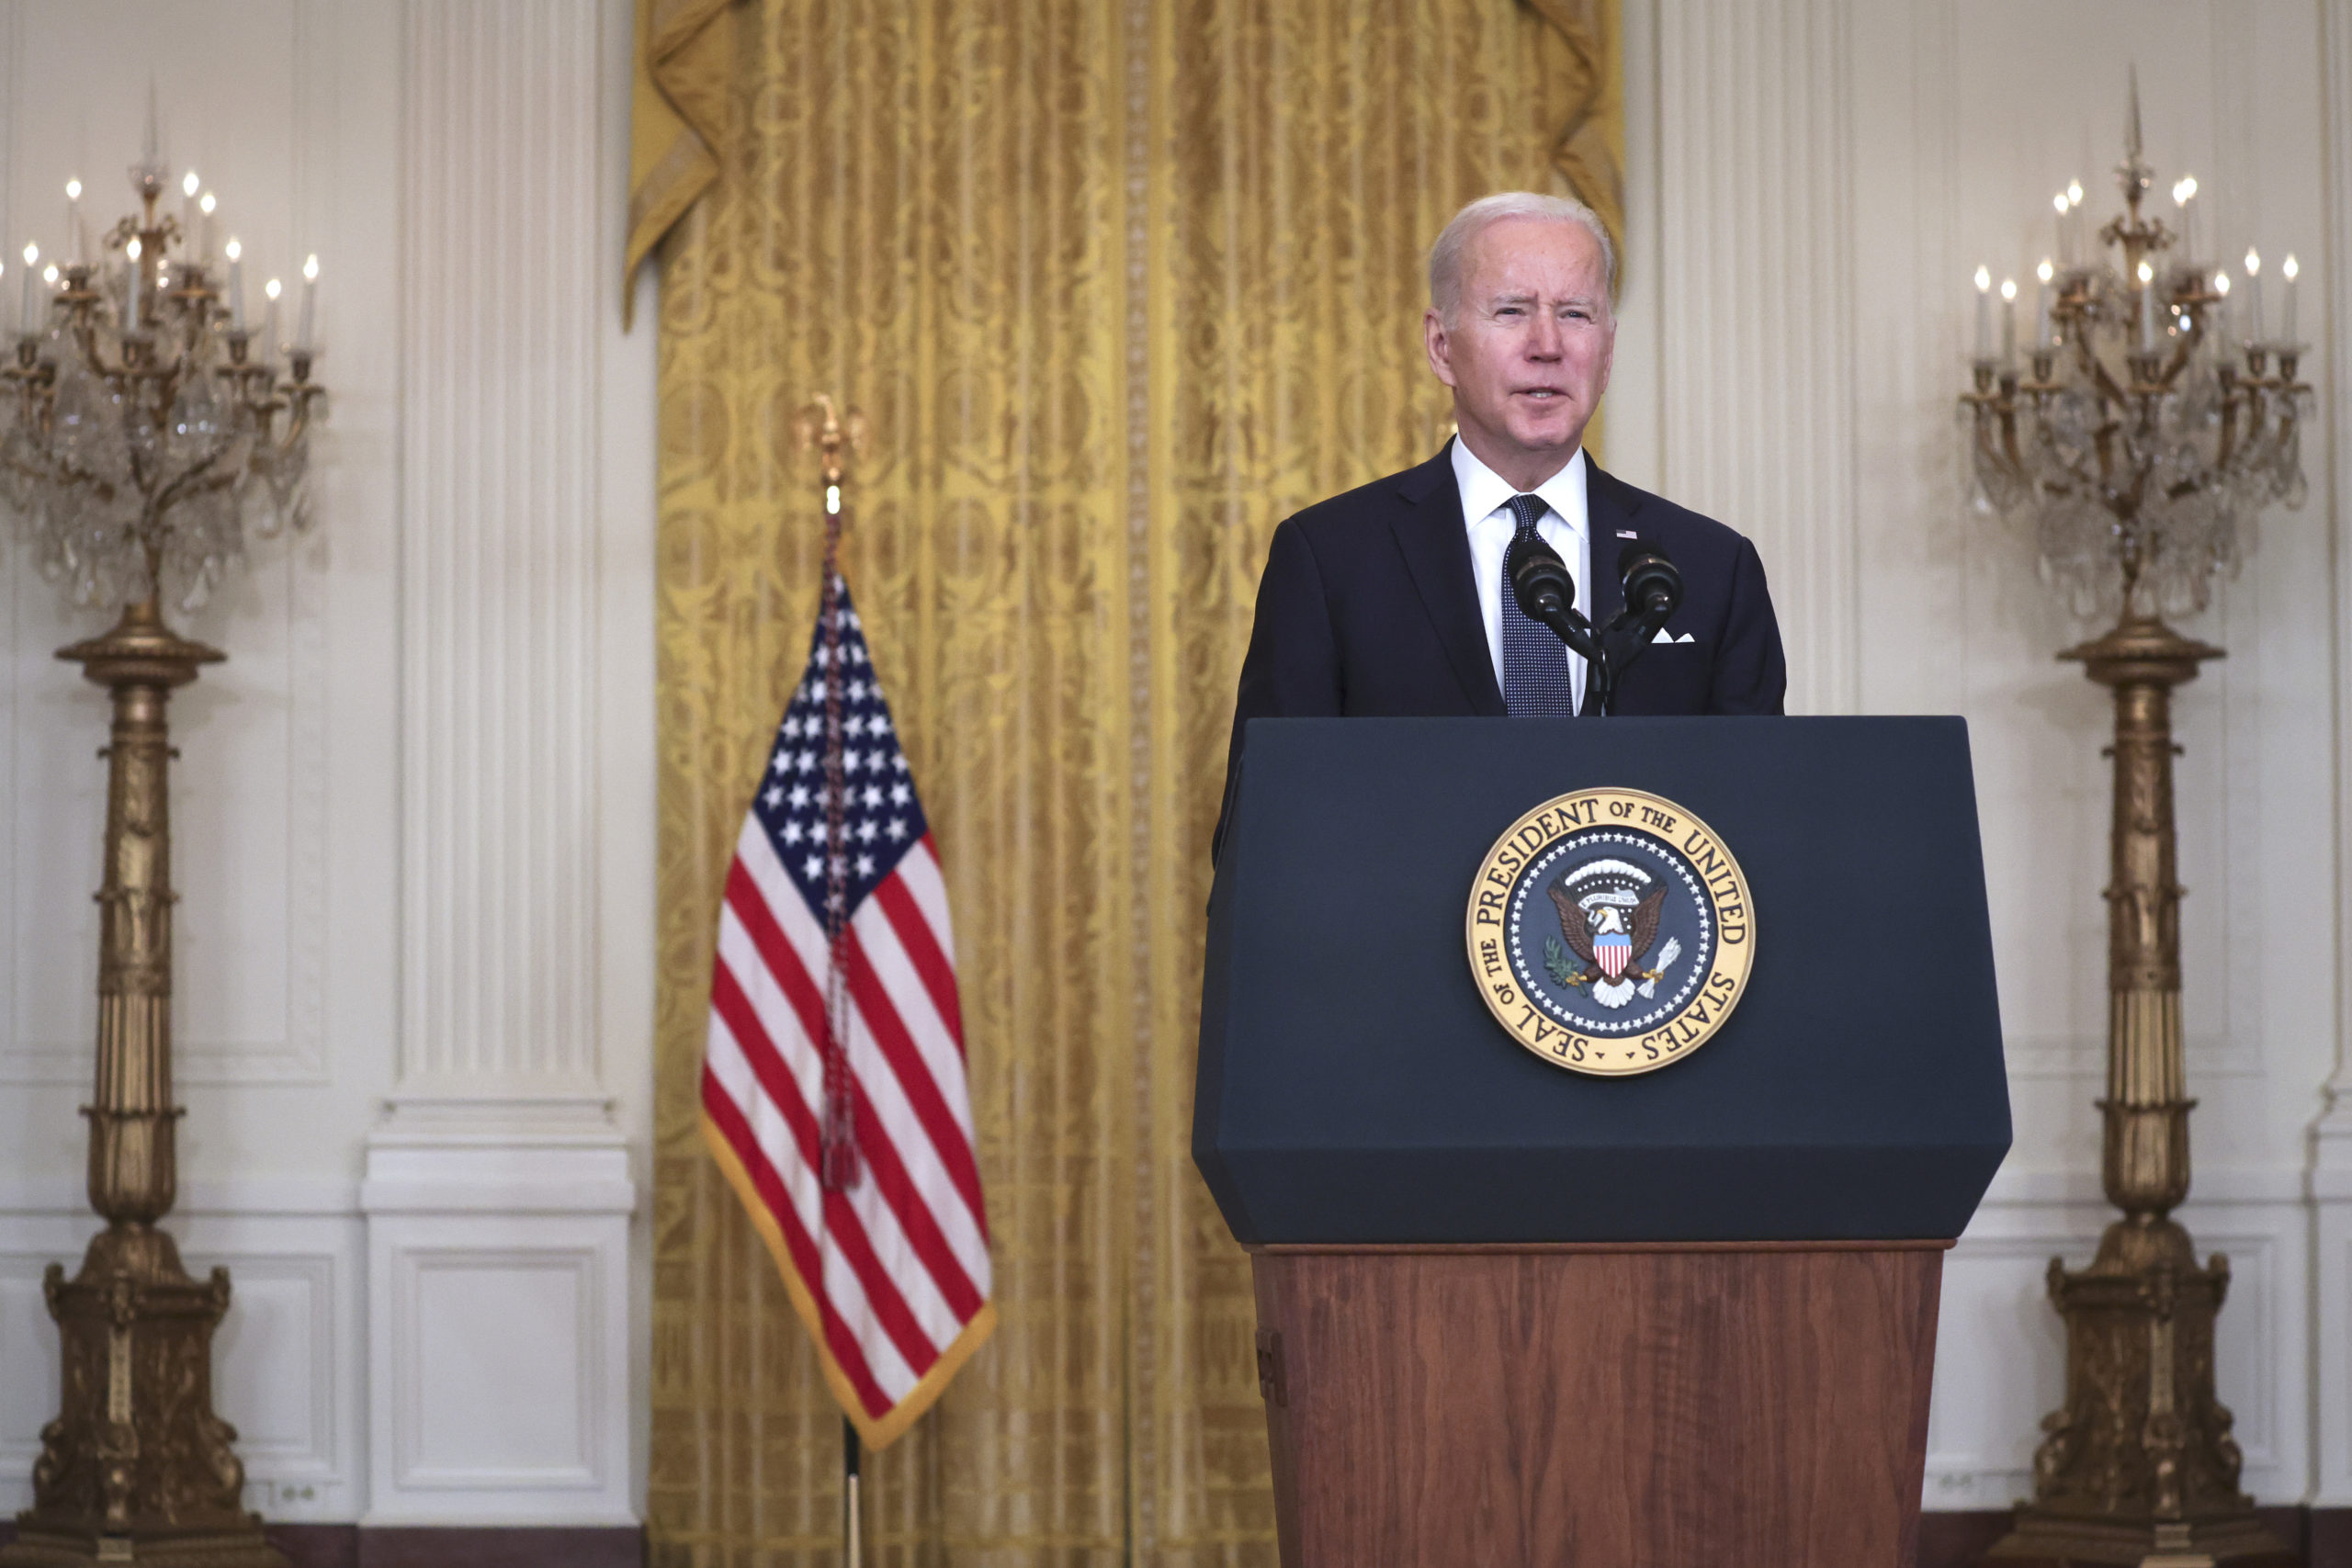 WASHINGTON, DC - FEBRUARY 15: U.S. President Joe Biden delivers remarks on Russia and Ukraine in the East Room of the White House on February 15, 2022 in Washington, DC. President Biden said the United States remains open to high-level diplomacy in close coordination with allies, building on the multiple diplomatic off-ramps the U.S., its allies and partners have offered Russia in recent months. (Photo by Alex Wong/Getty Images)